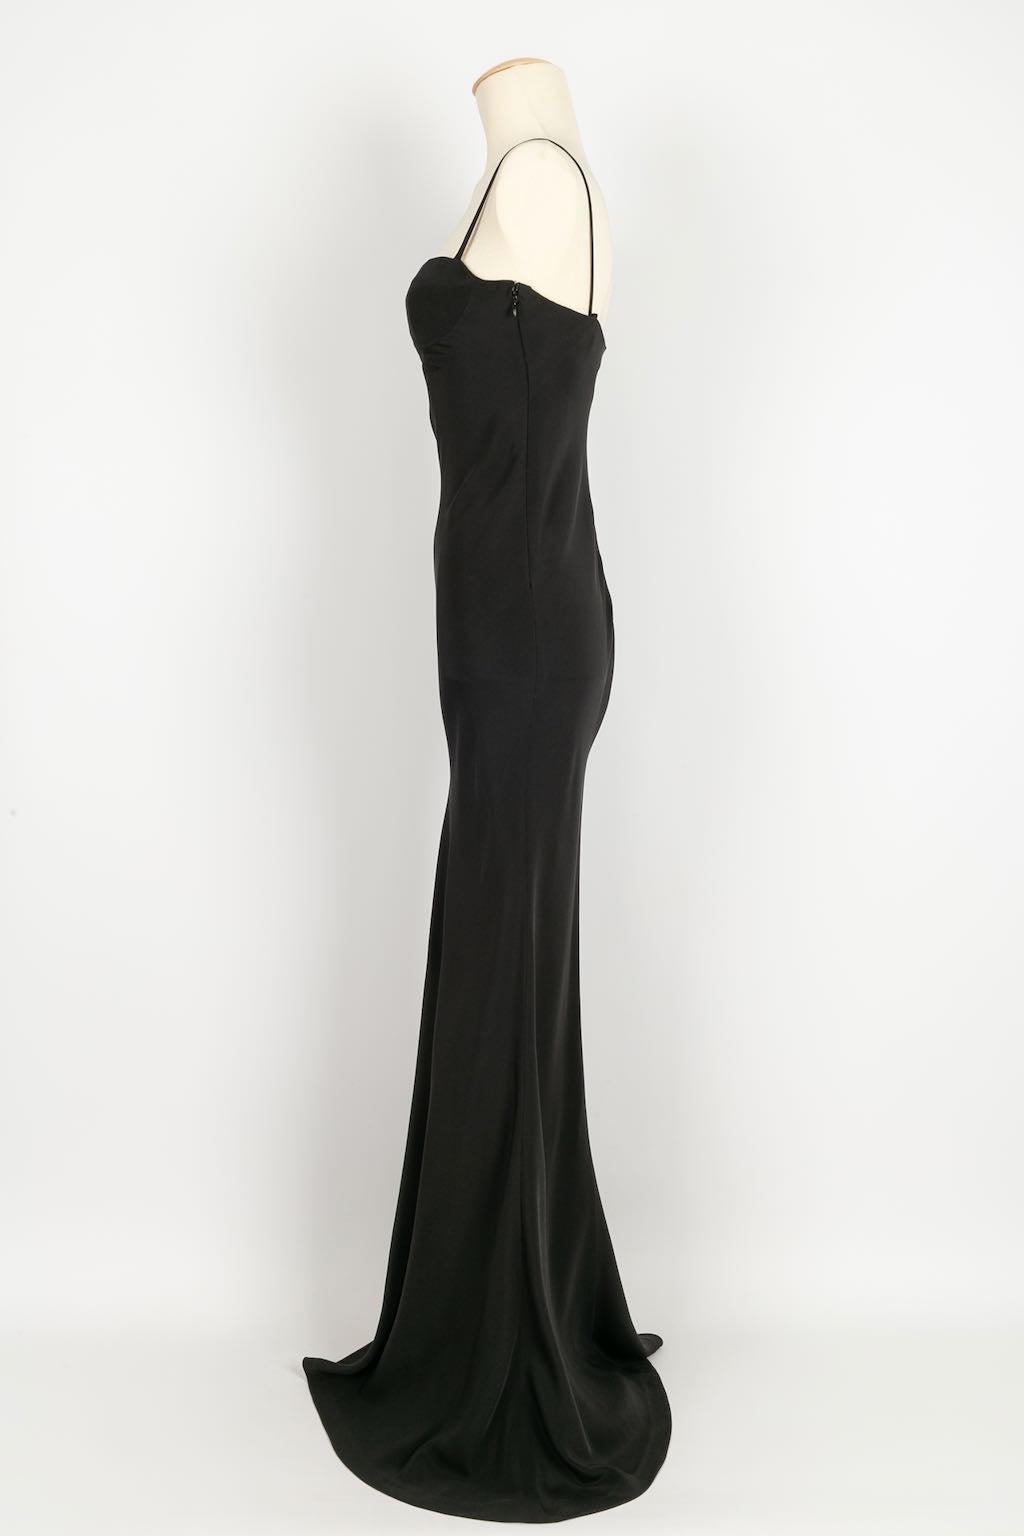 Franck Sorbier -Long silk Haute Couture dress. No size label or composition, it corresponds to a 36FR.

Additional information: 
Dimensions: Chest: 38 cm, Hips: 46 cm, Length: 170 cm
Condition: Very good condition
Seller Ref number: VR88